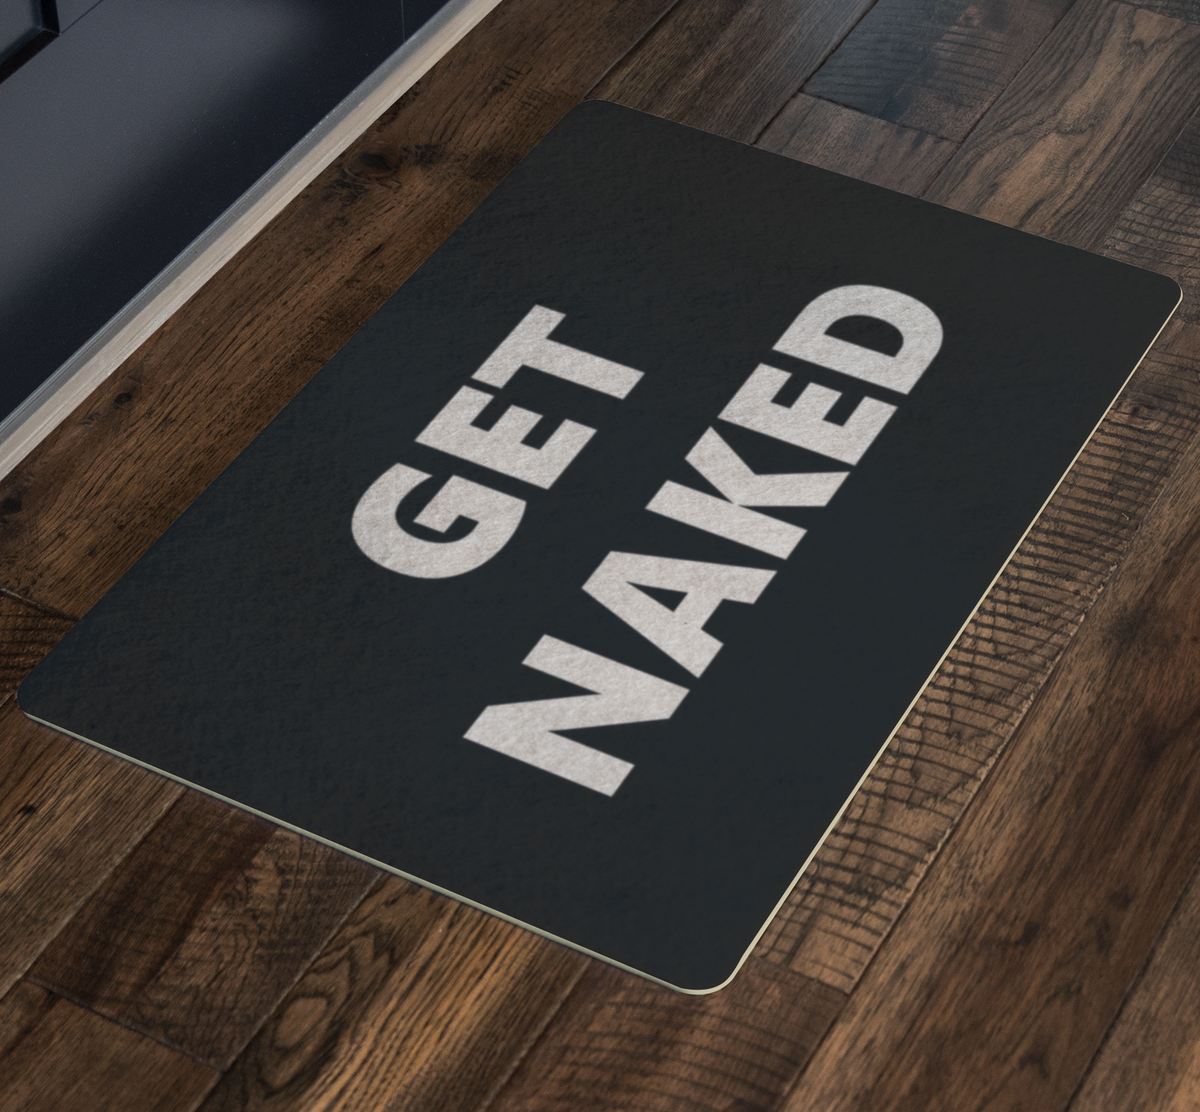 Get Naked Black and White Bath Mat